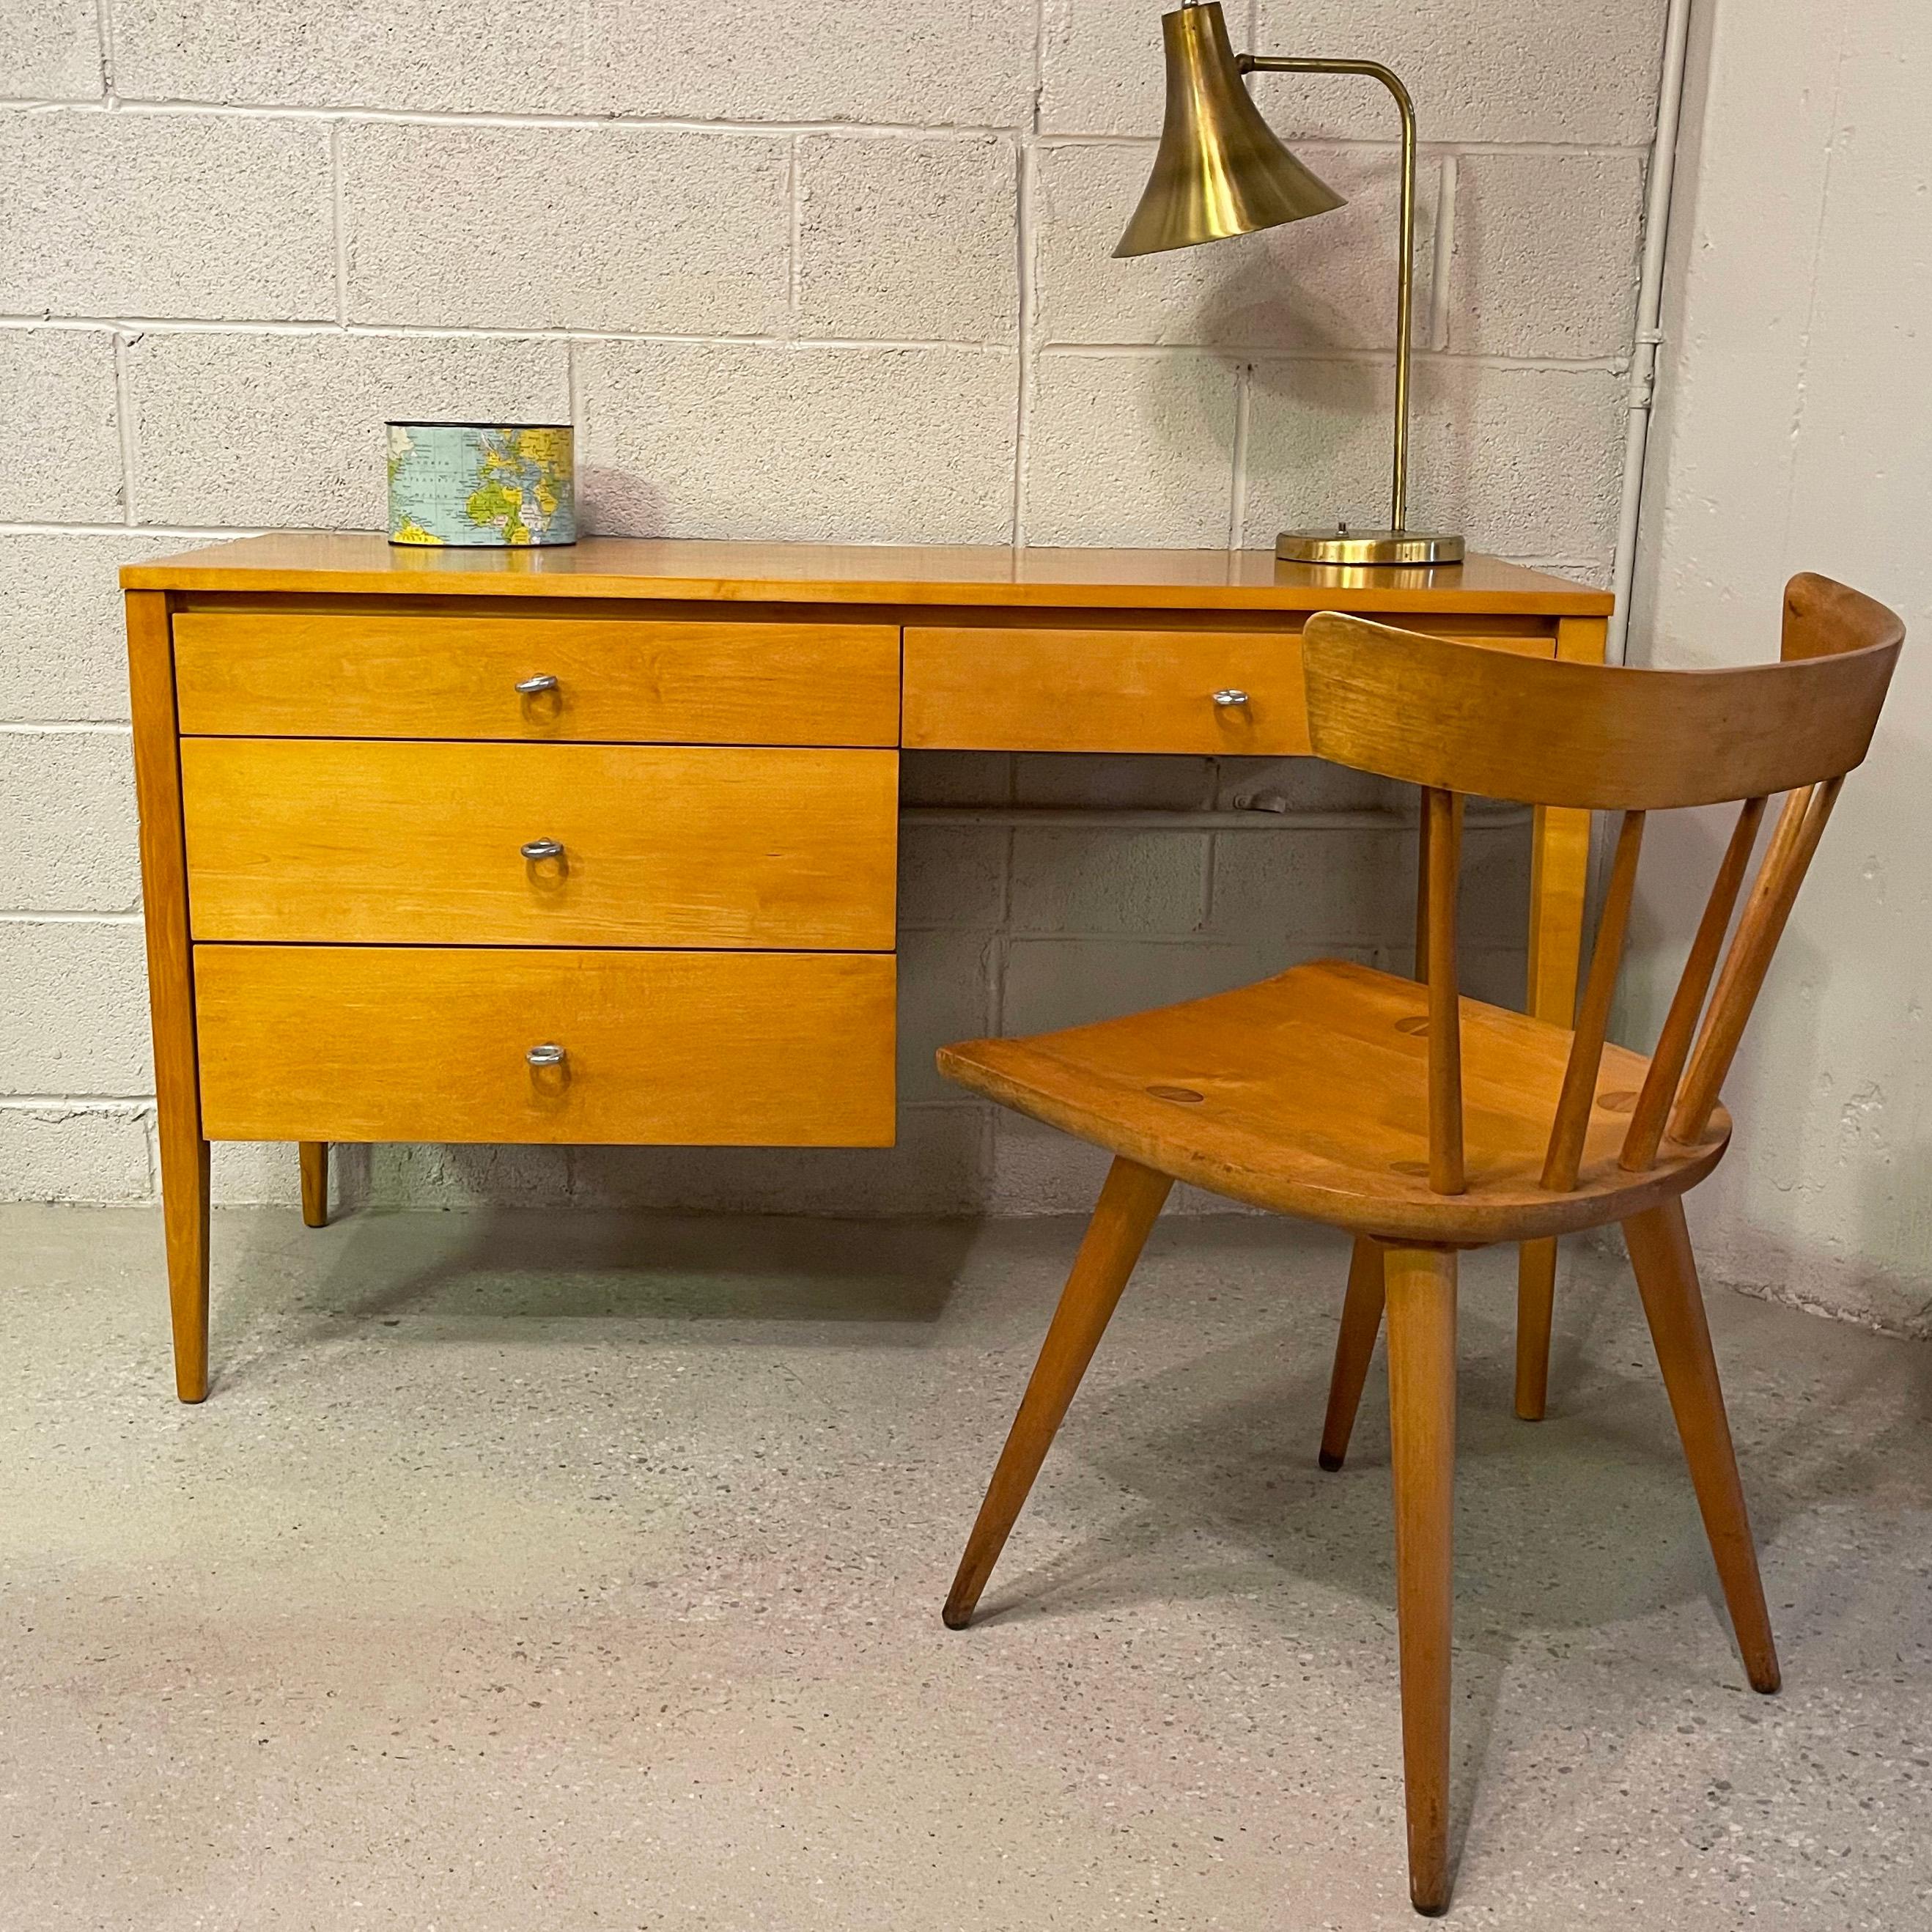 20th Century Mid-Century Modern Maple Desk By Paul McCobb For Planner Group For Sale